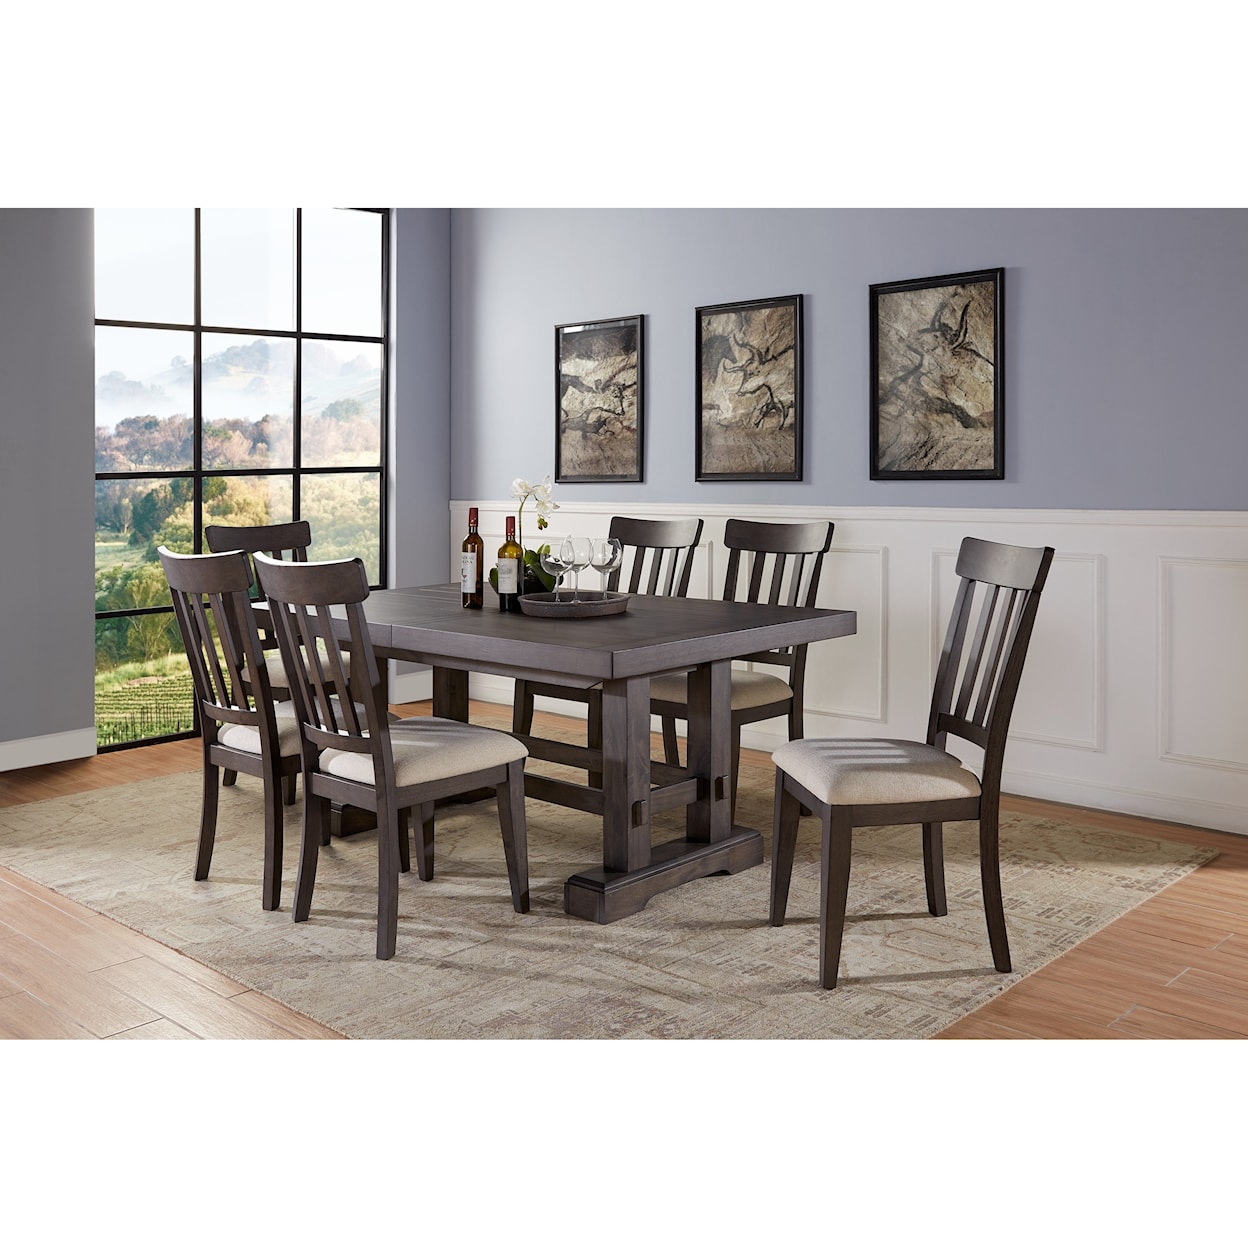 Steve Silver Napa 7-Piece Table and Chair Set 